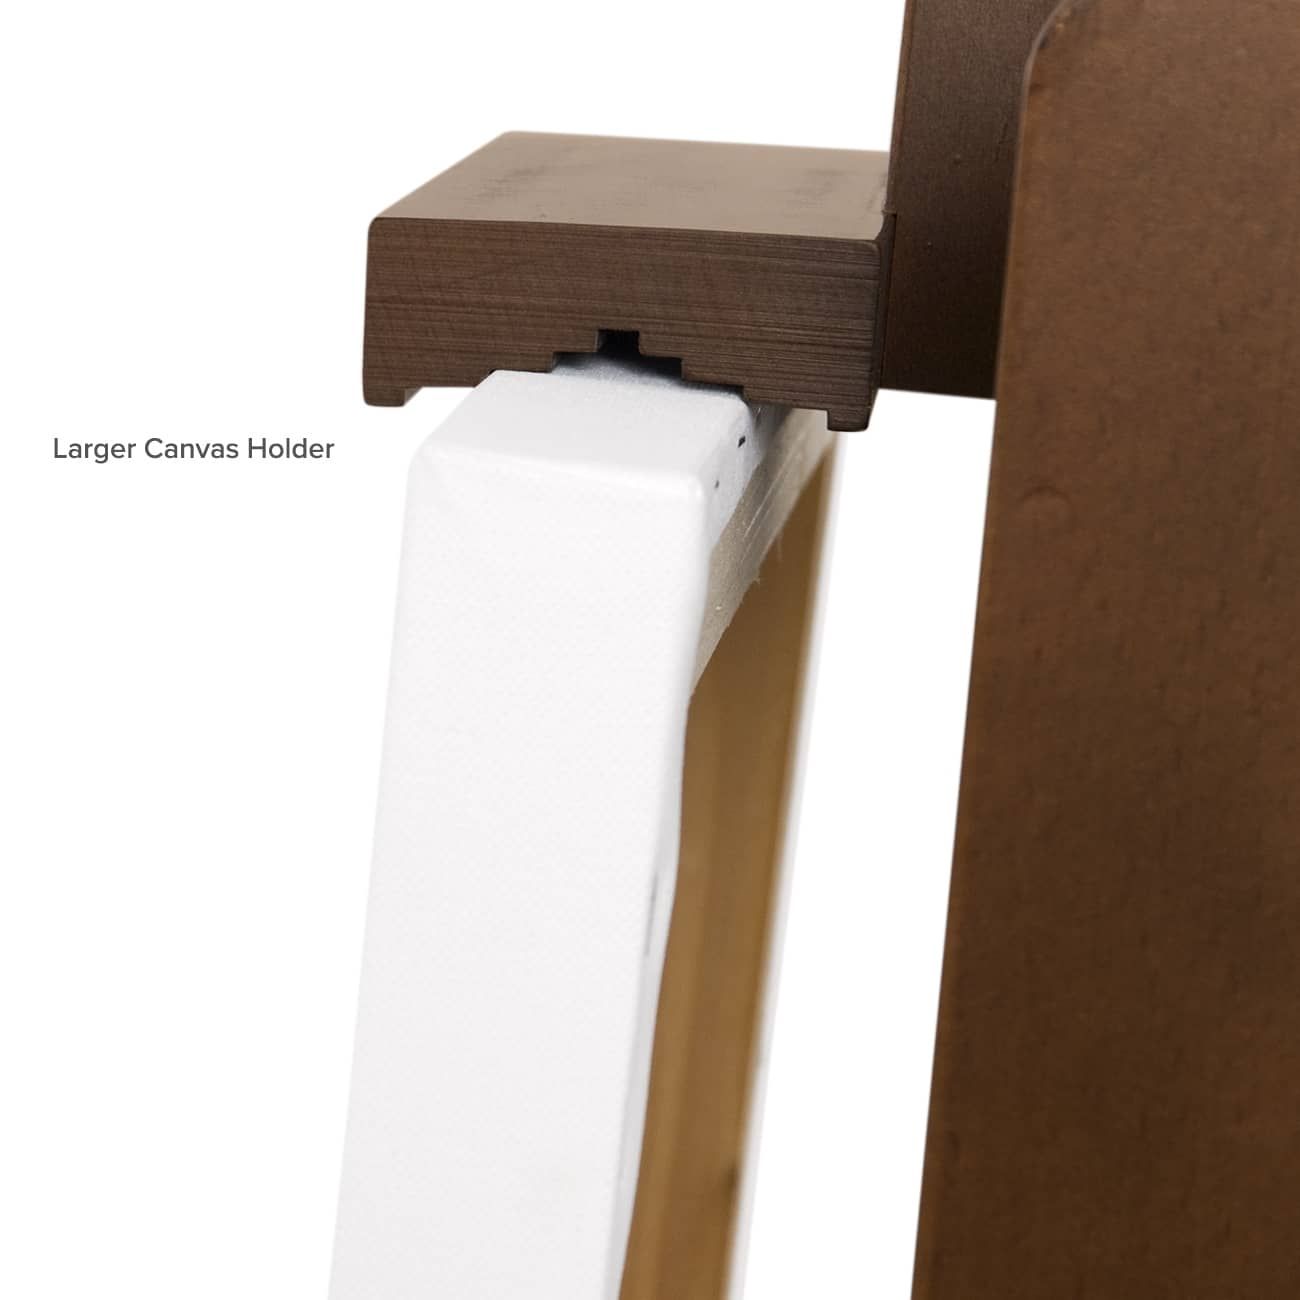 Three canvas holders allow for quick canvas set up - Larger Canvas Holder